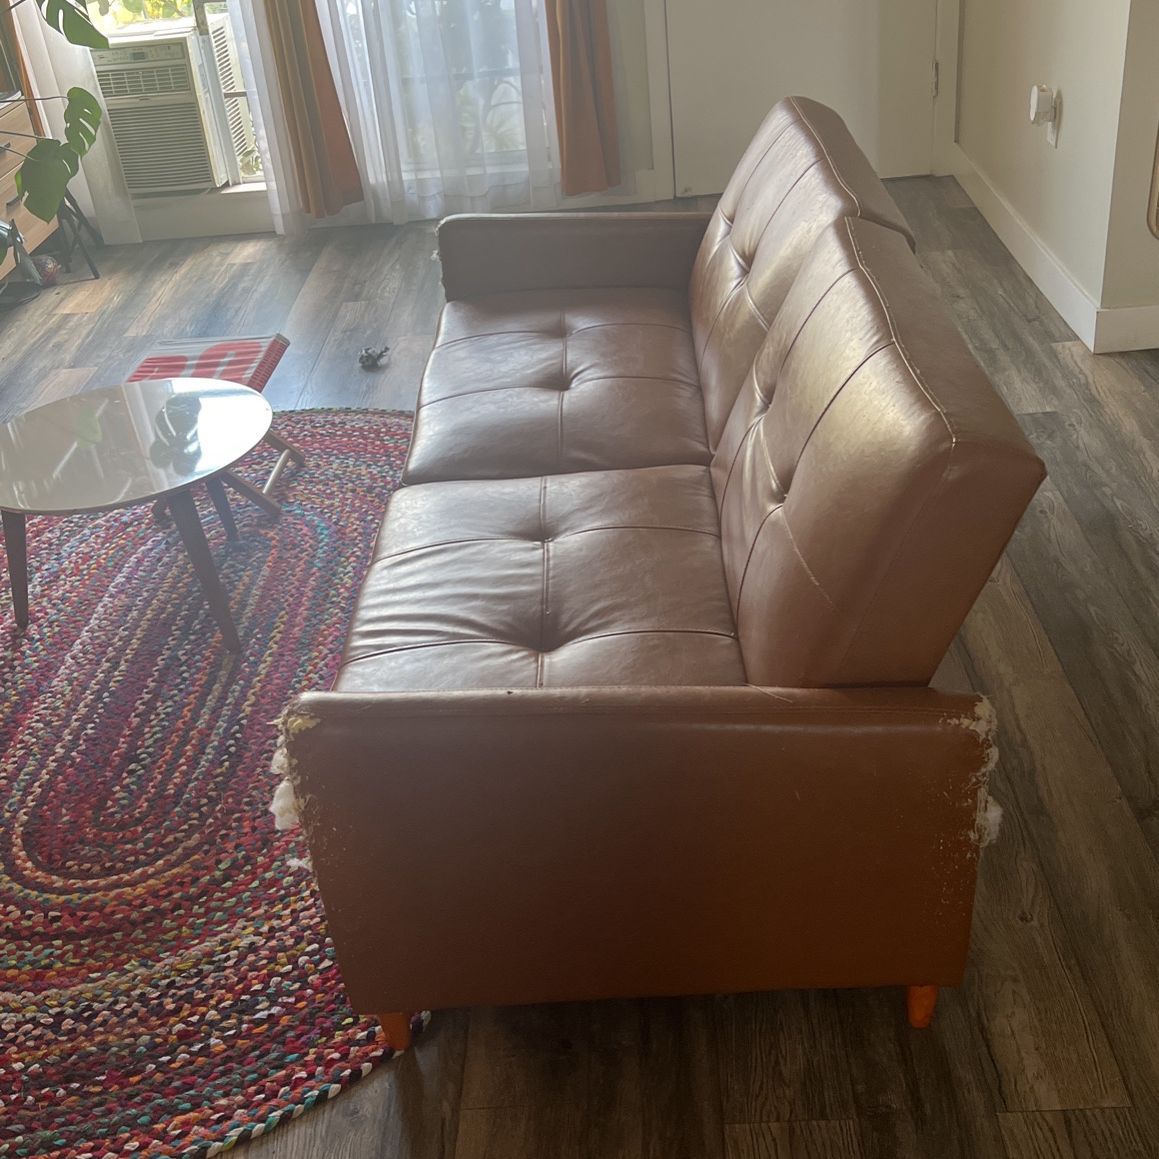 FREE COUCH! 